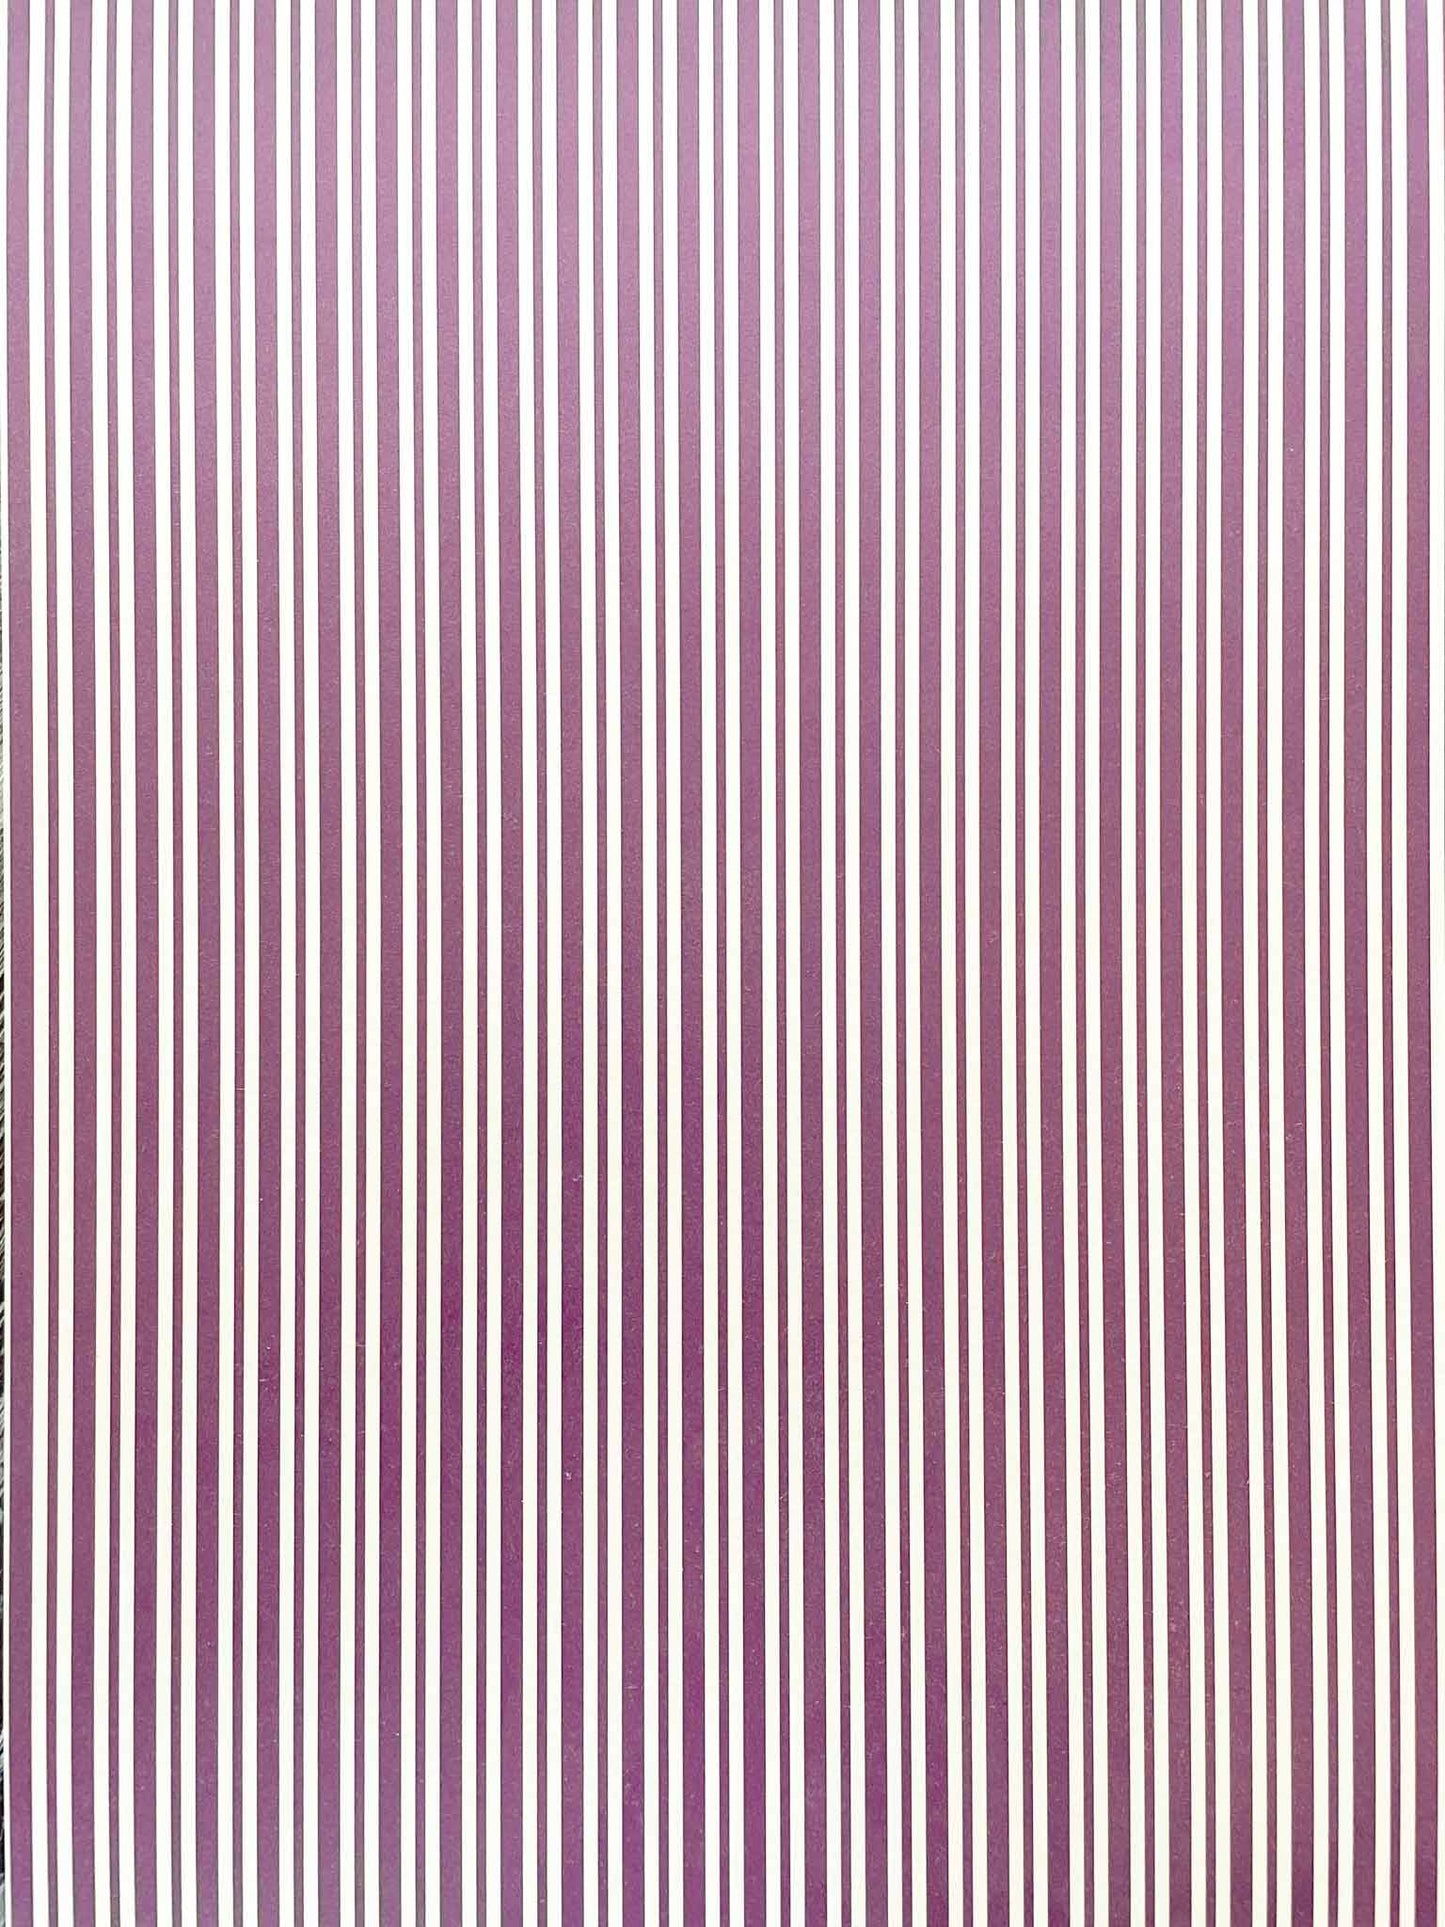 purple-and-white-stripy-paper